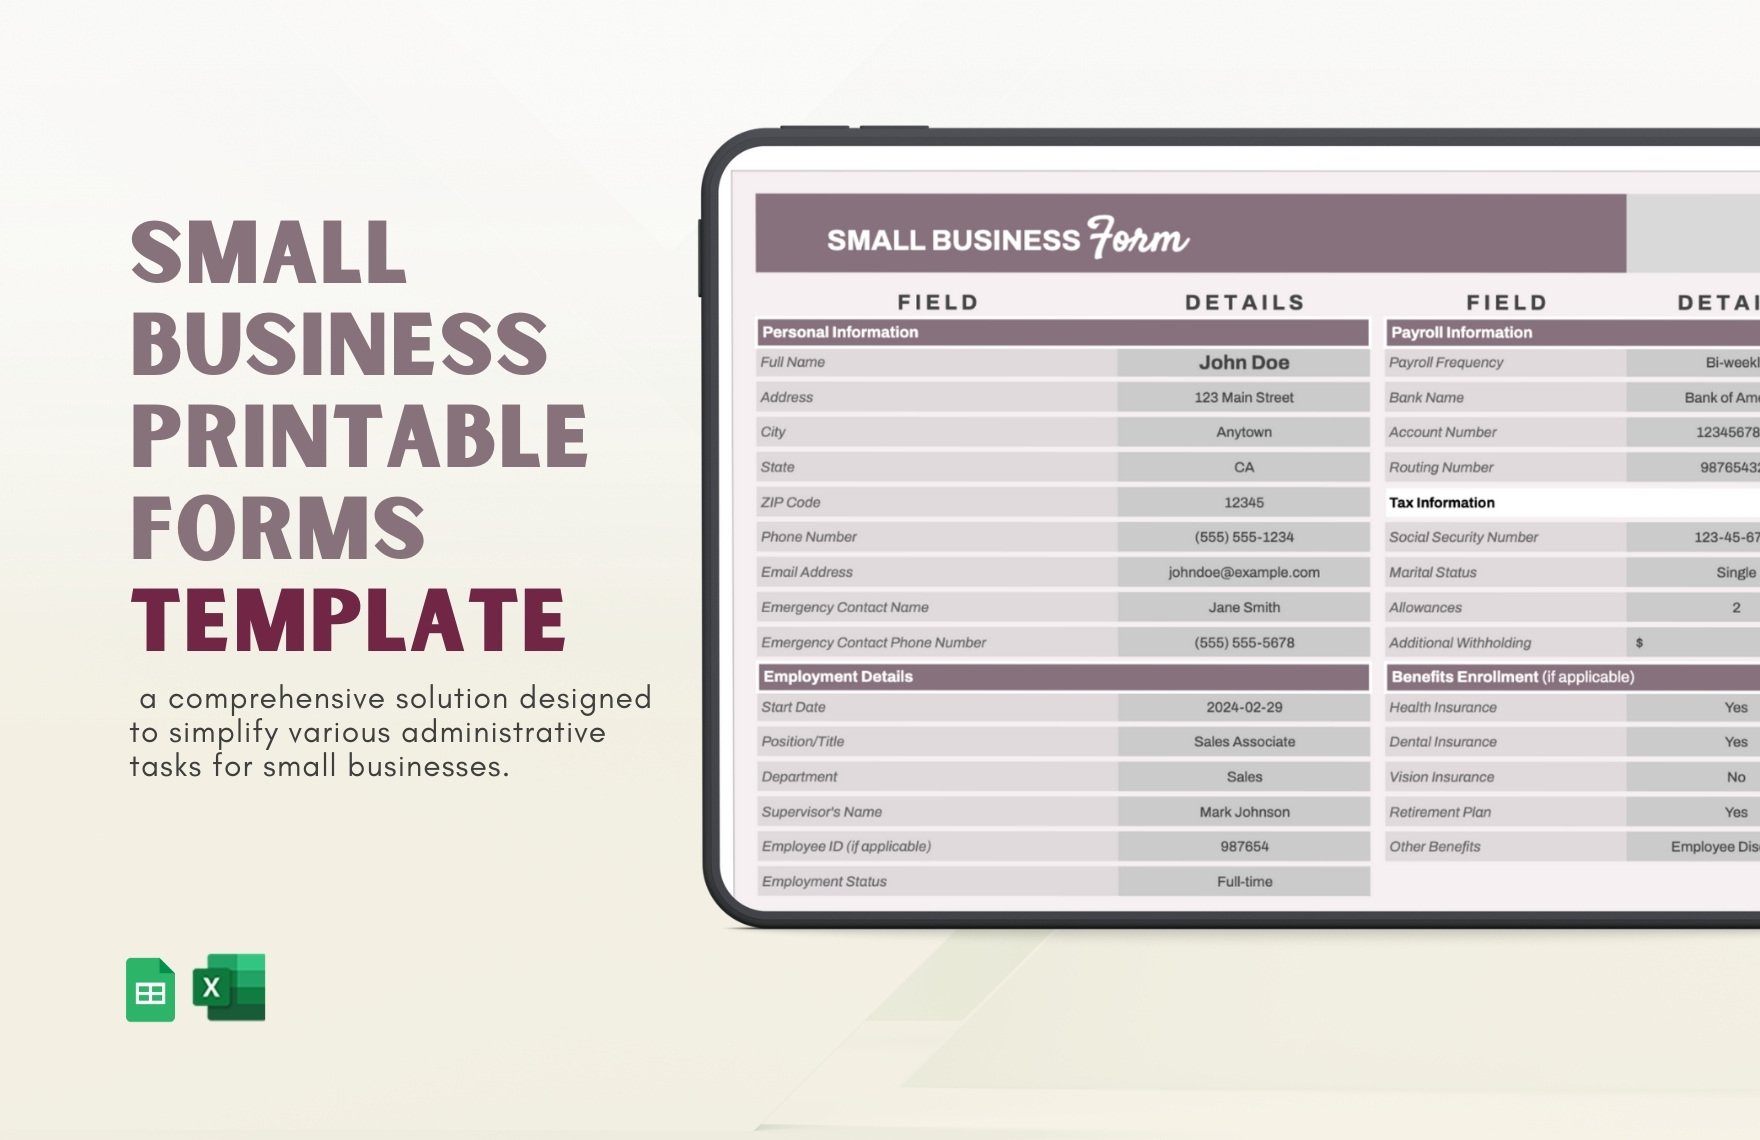 Small Business Printable Forms Template in Excel, Google Sheets